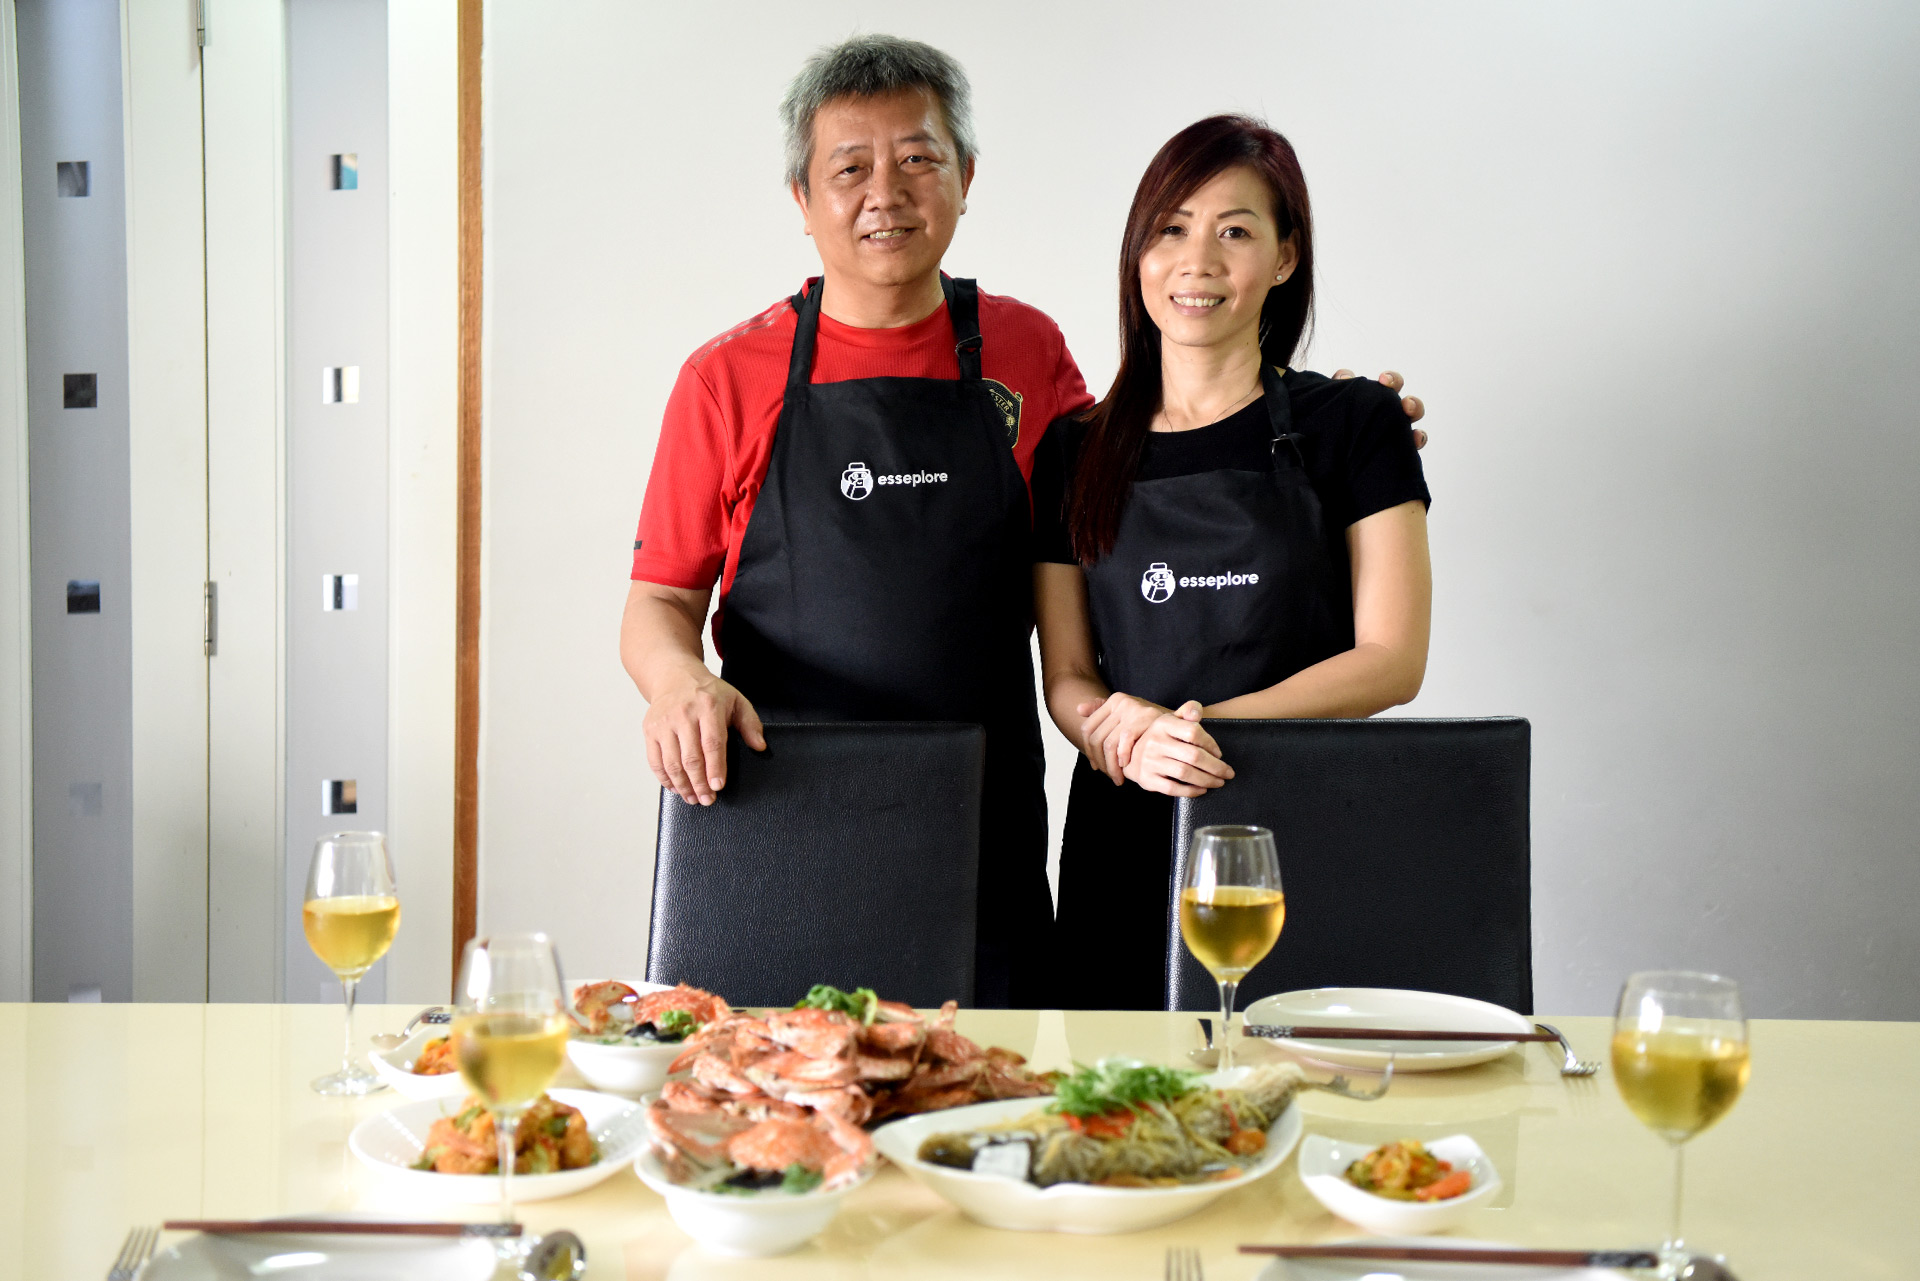 Chef Highlight: Meet Angler Home Chefs Andrew and Sandy